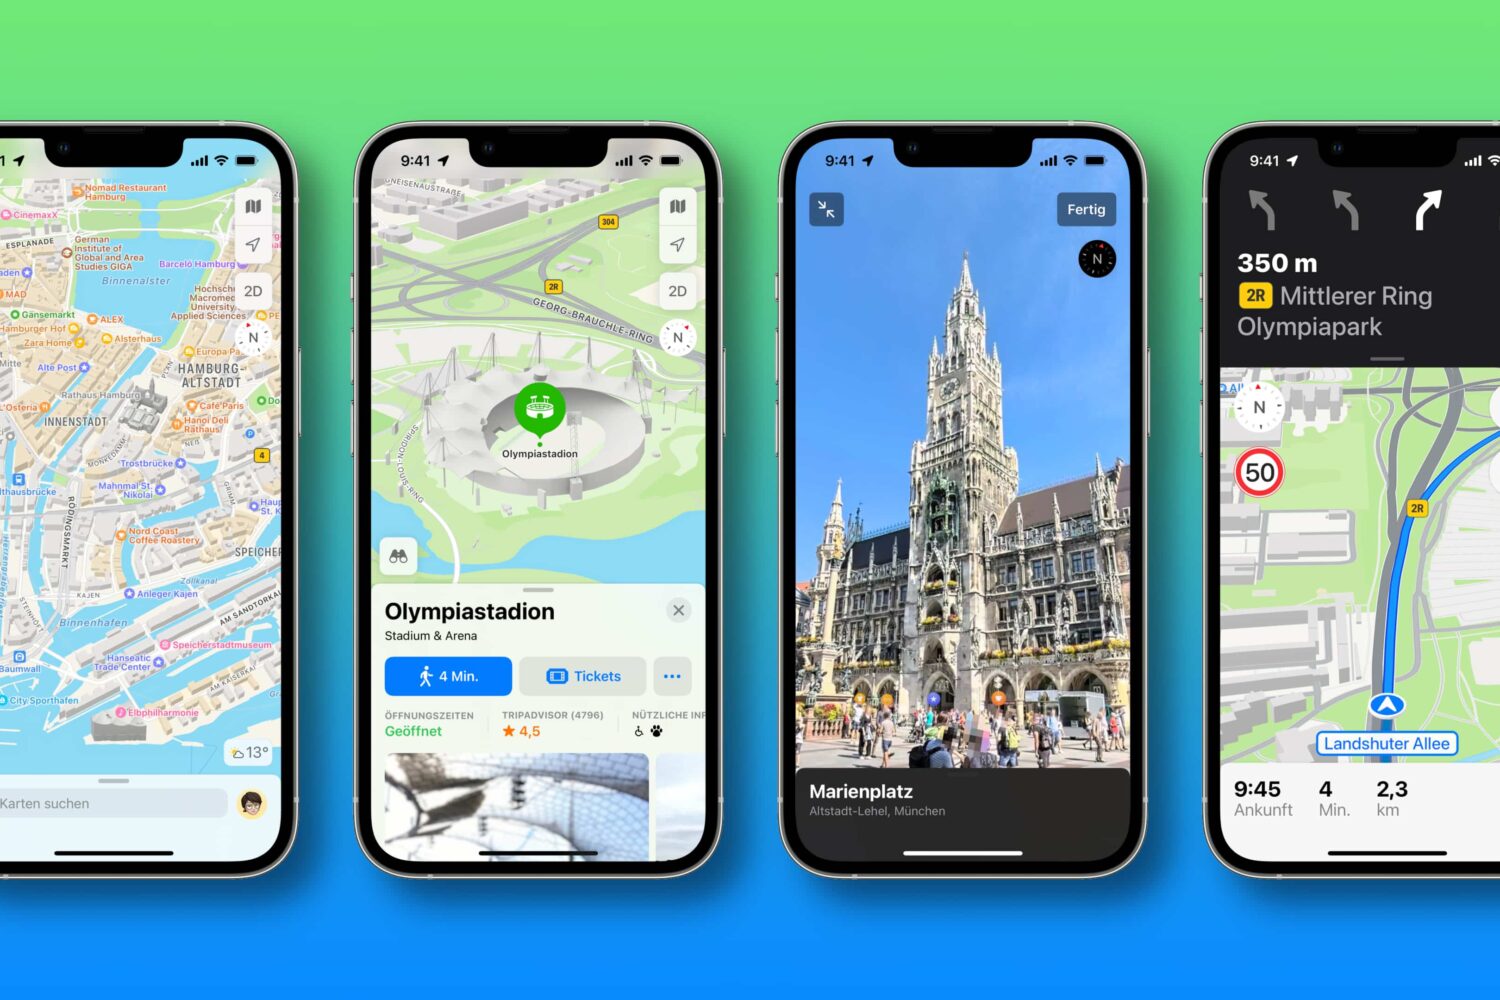 Four iPhone screenshots showcasing the new Apple Maps features in Germany, from left to right: detailed road coverage, 3D landmarks like Olympiastadion, the Look Around feature for Marienplatz and improved navigation.